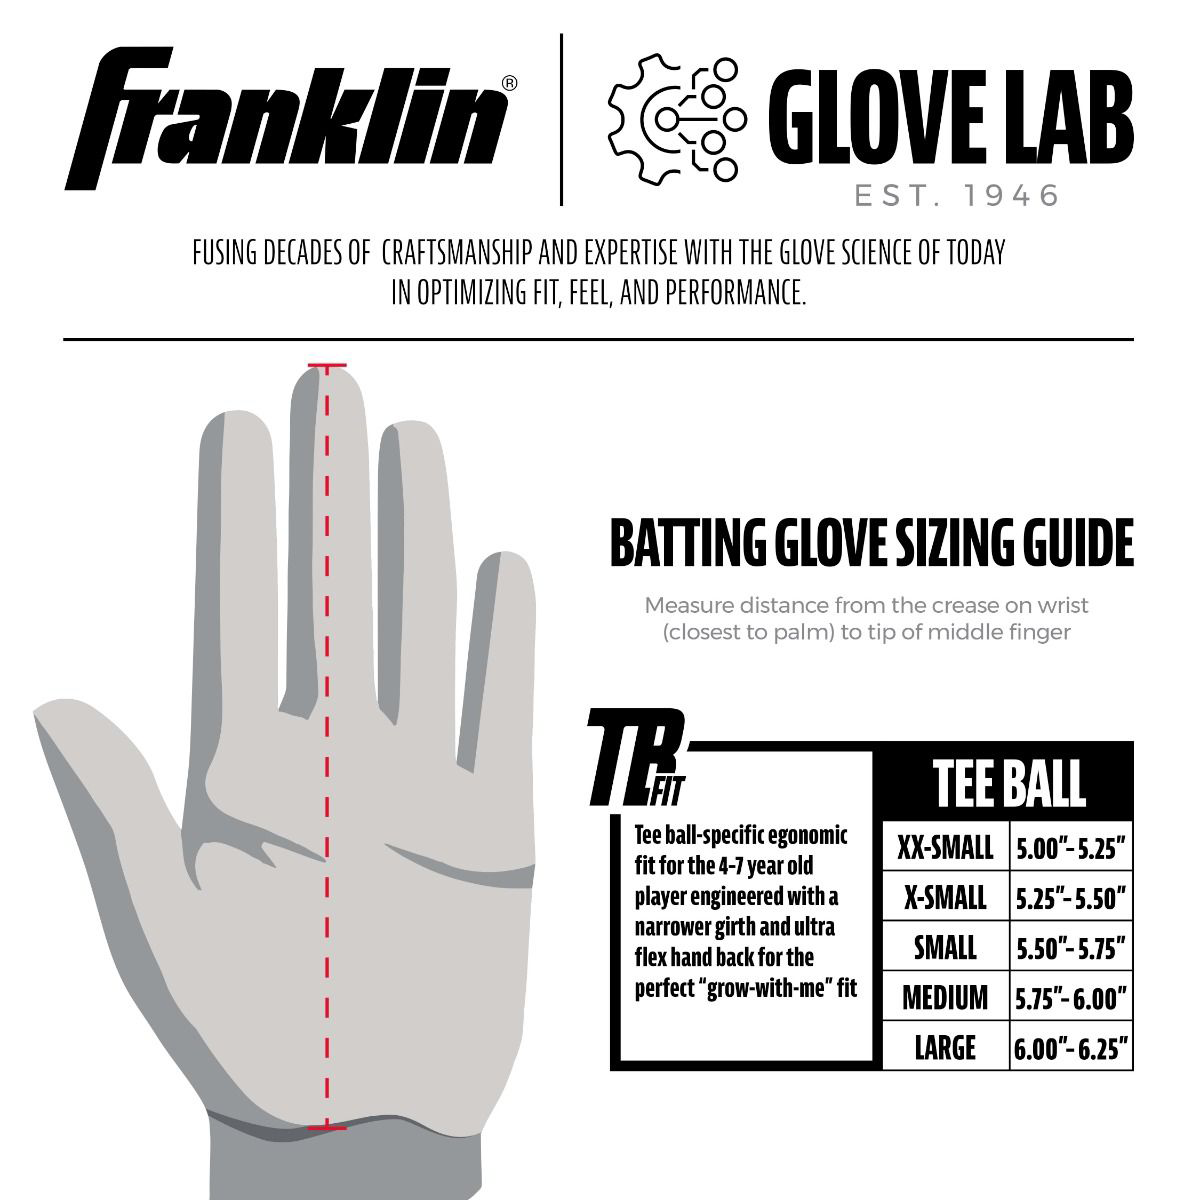 Youth Grow-To-Pro Tee Ball Batting Gloves alternate view